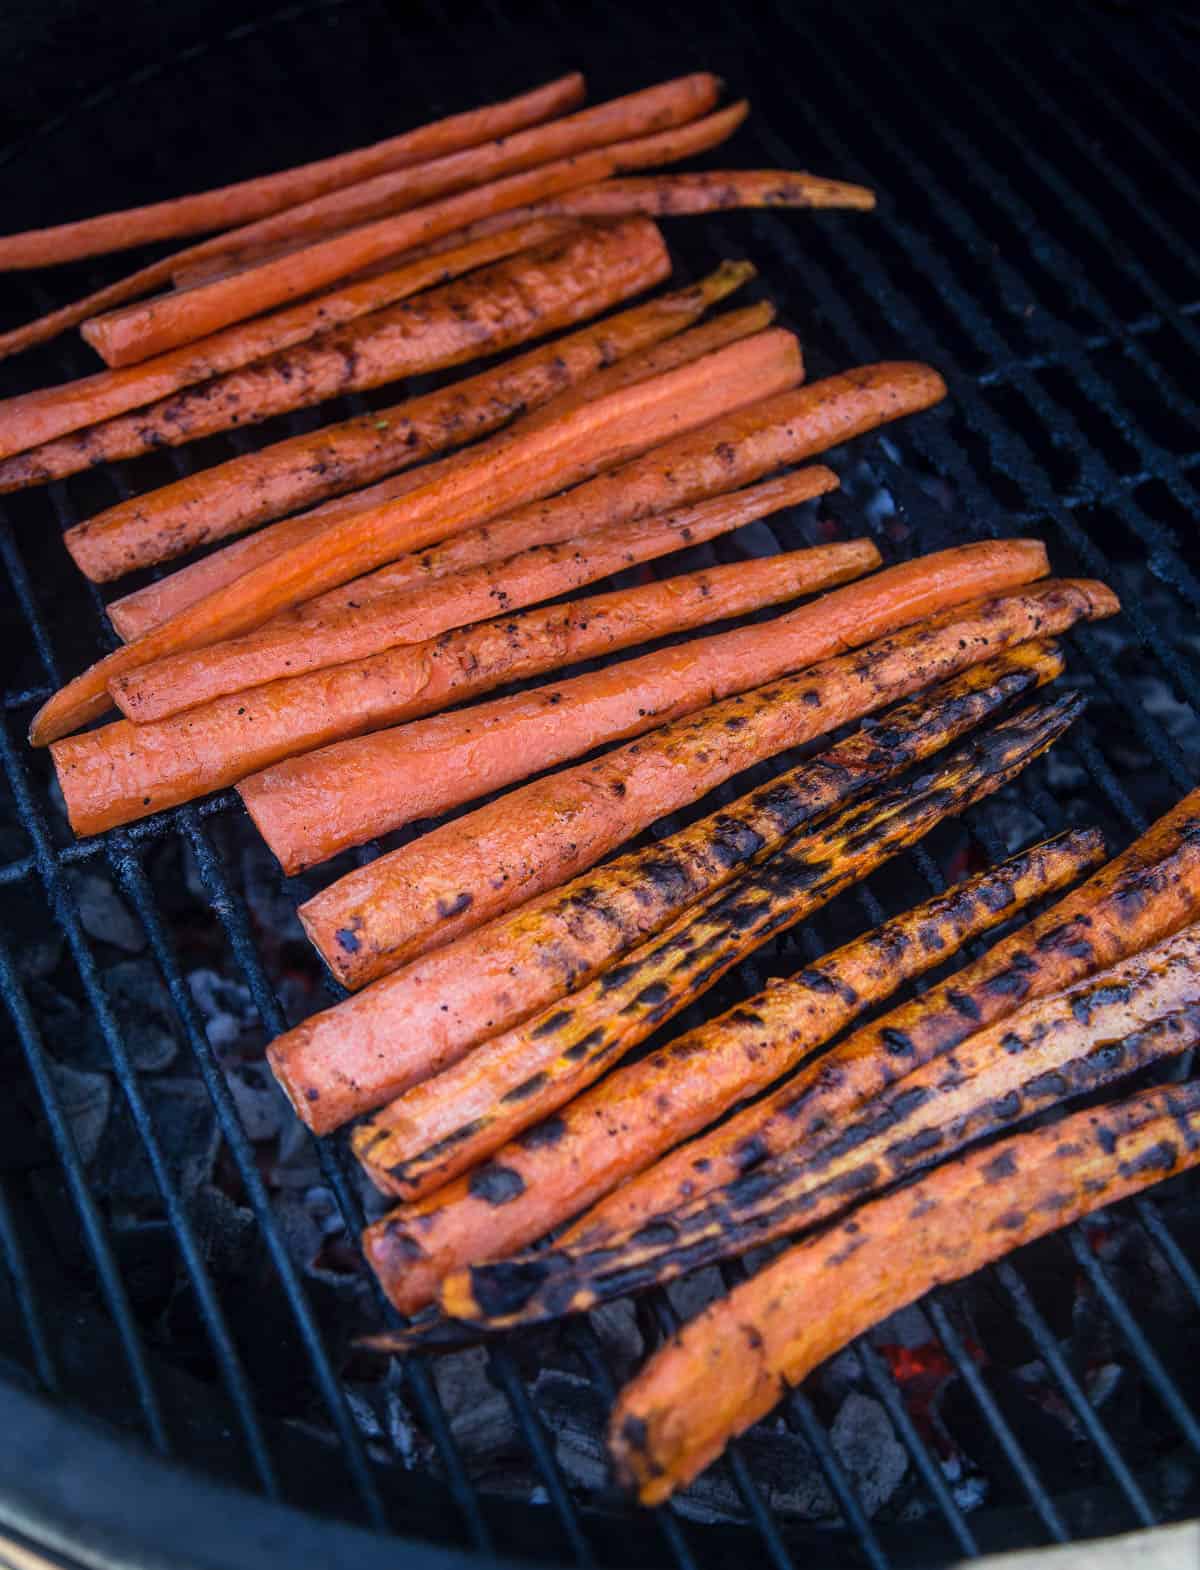 Grilling carrots on the grill